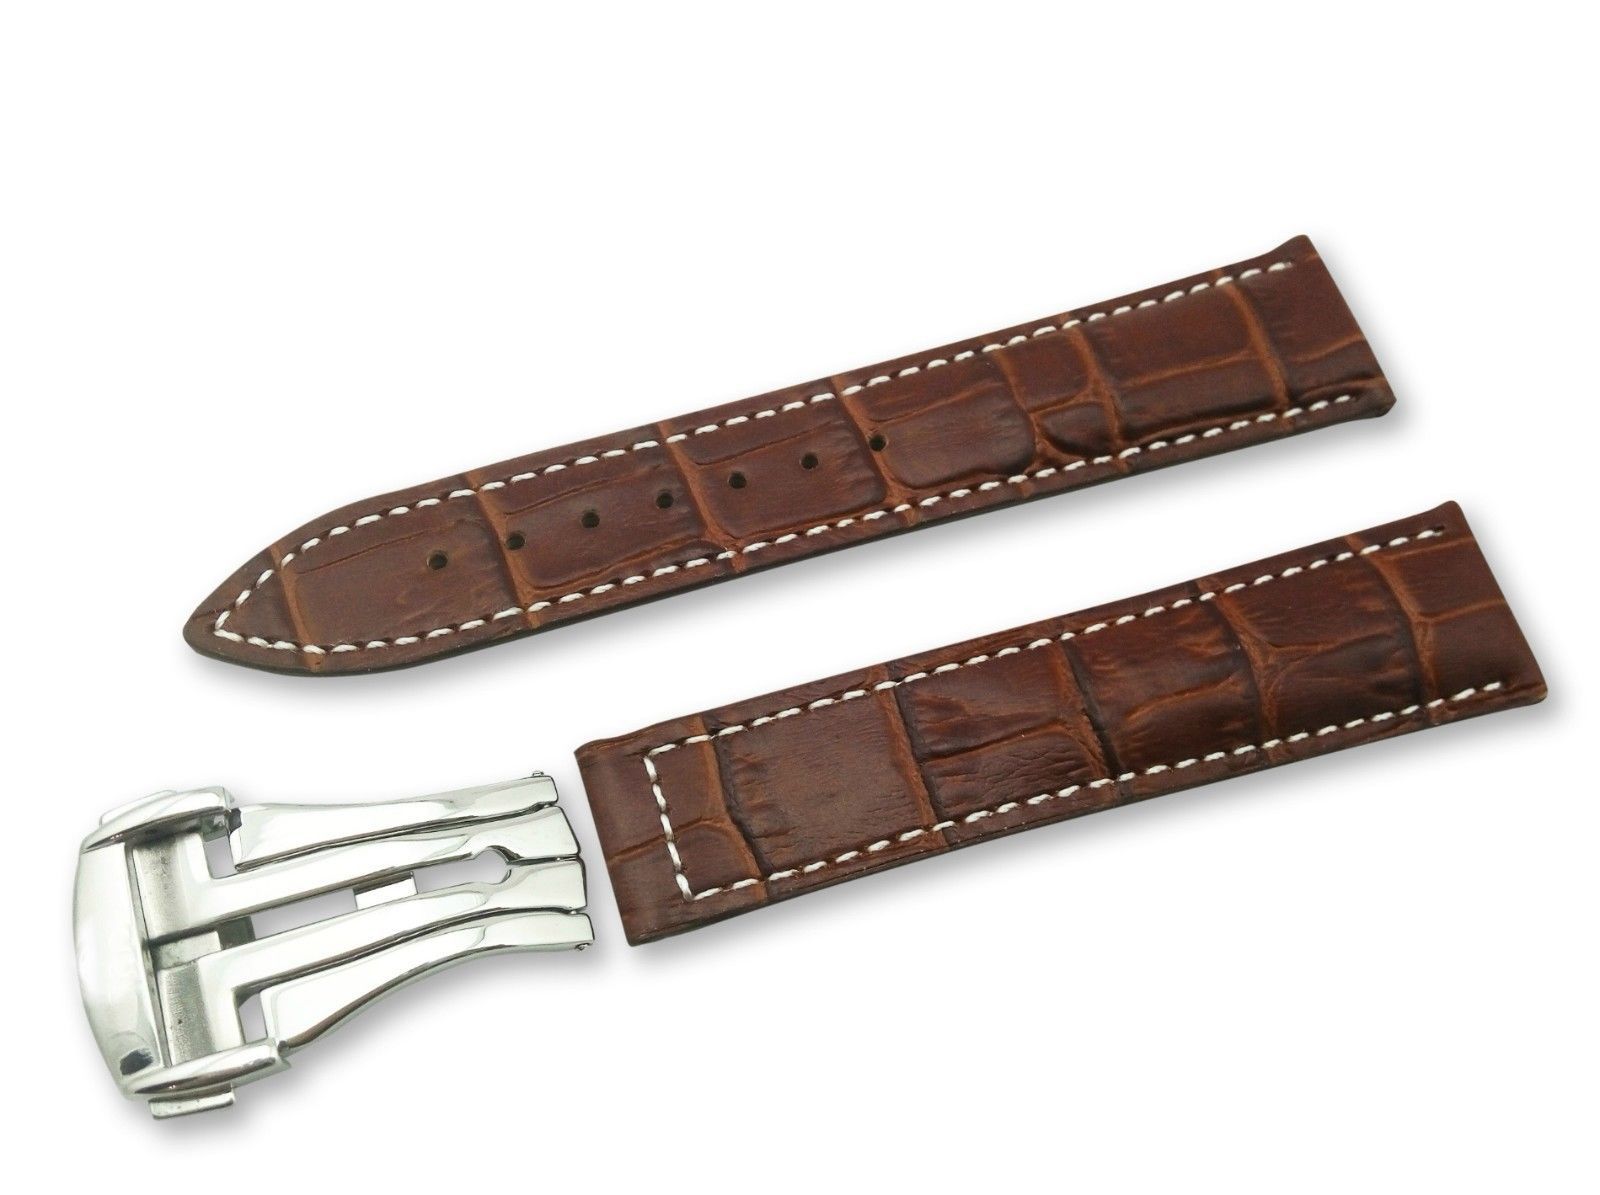 Brown/White Cr Leather Watch Strap for Omega Seamaster Clasp 18 19 20 21 22mm - $37.26 - $51.29